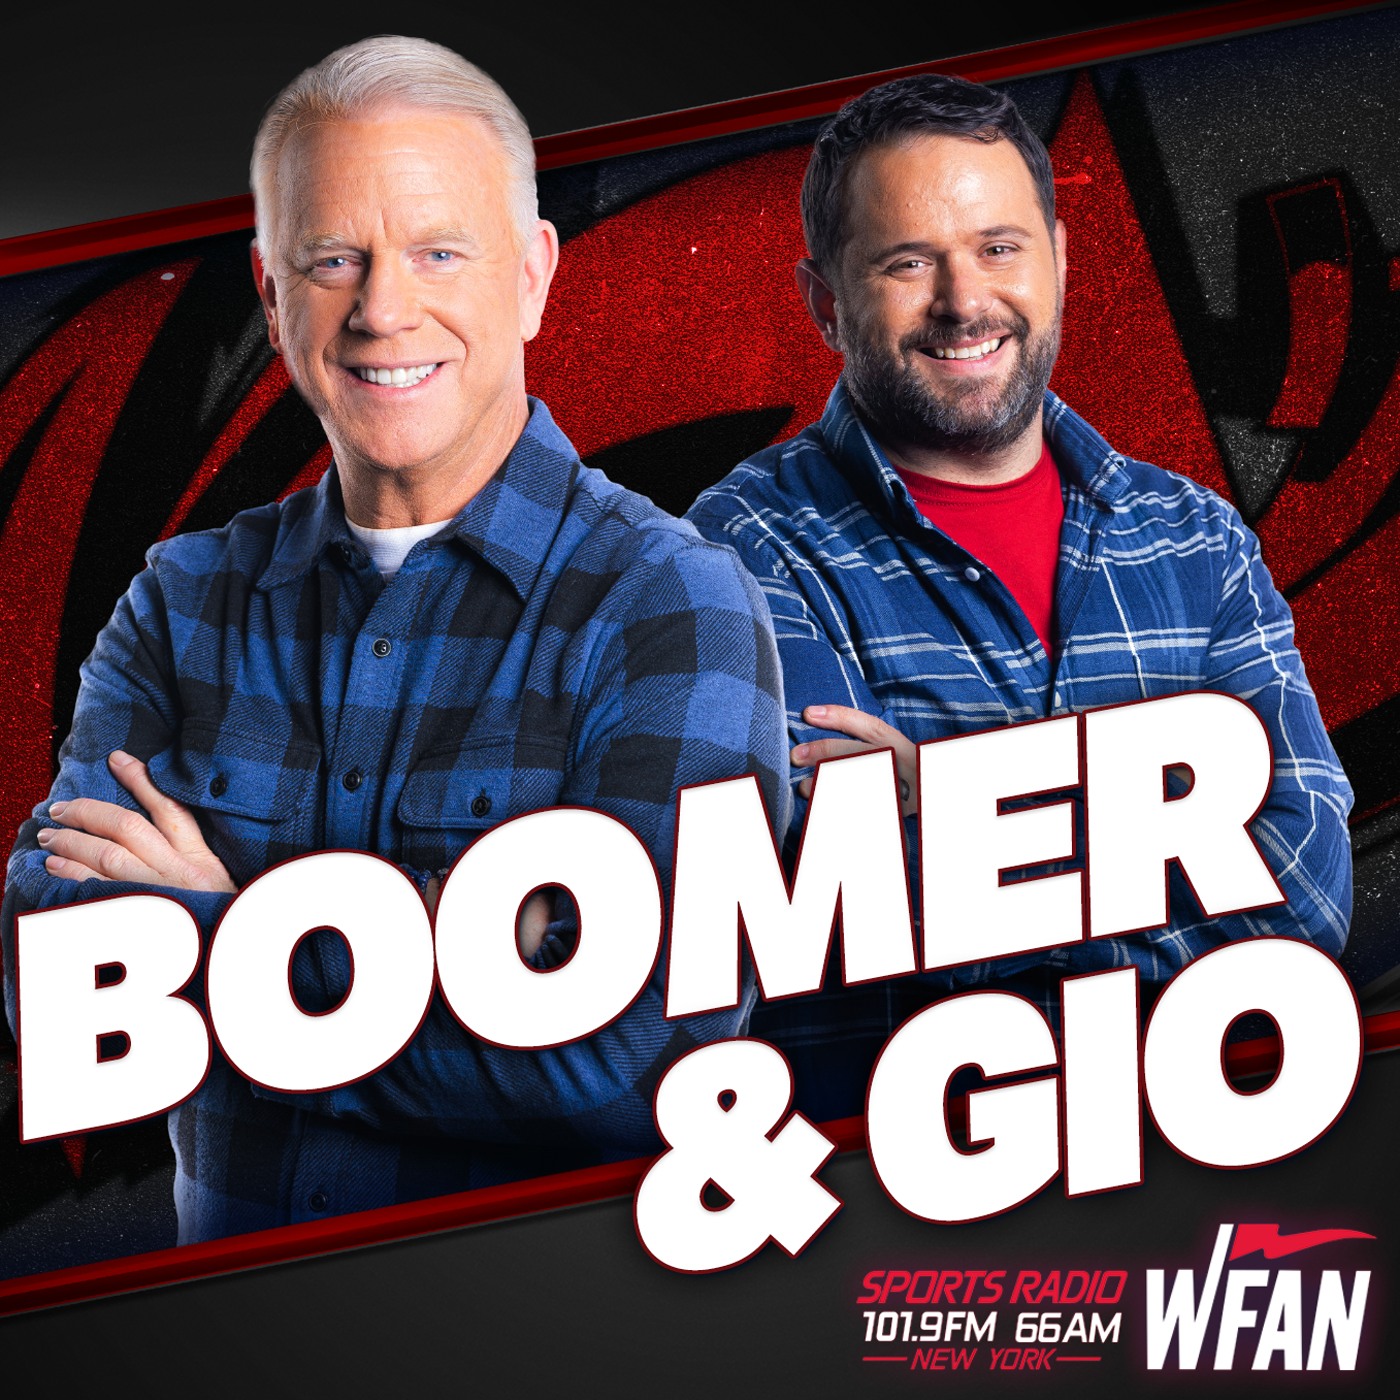 Boomer Excited As Rangers Make Playoffs; Jerry With Audio Of Rangers Win; Roger Goodell On Kickoffs & Christmas Games; Diddy's House Raided By Feds (Hour 1)